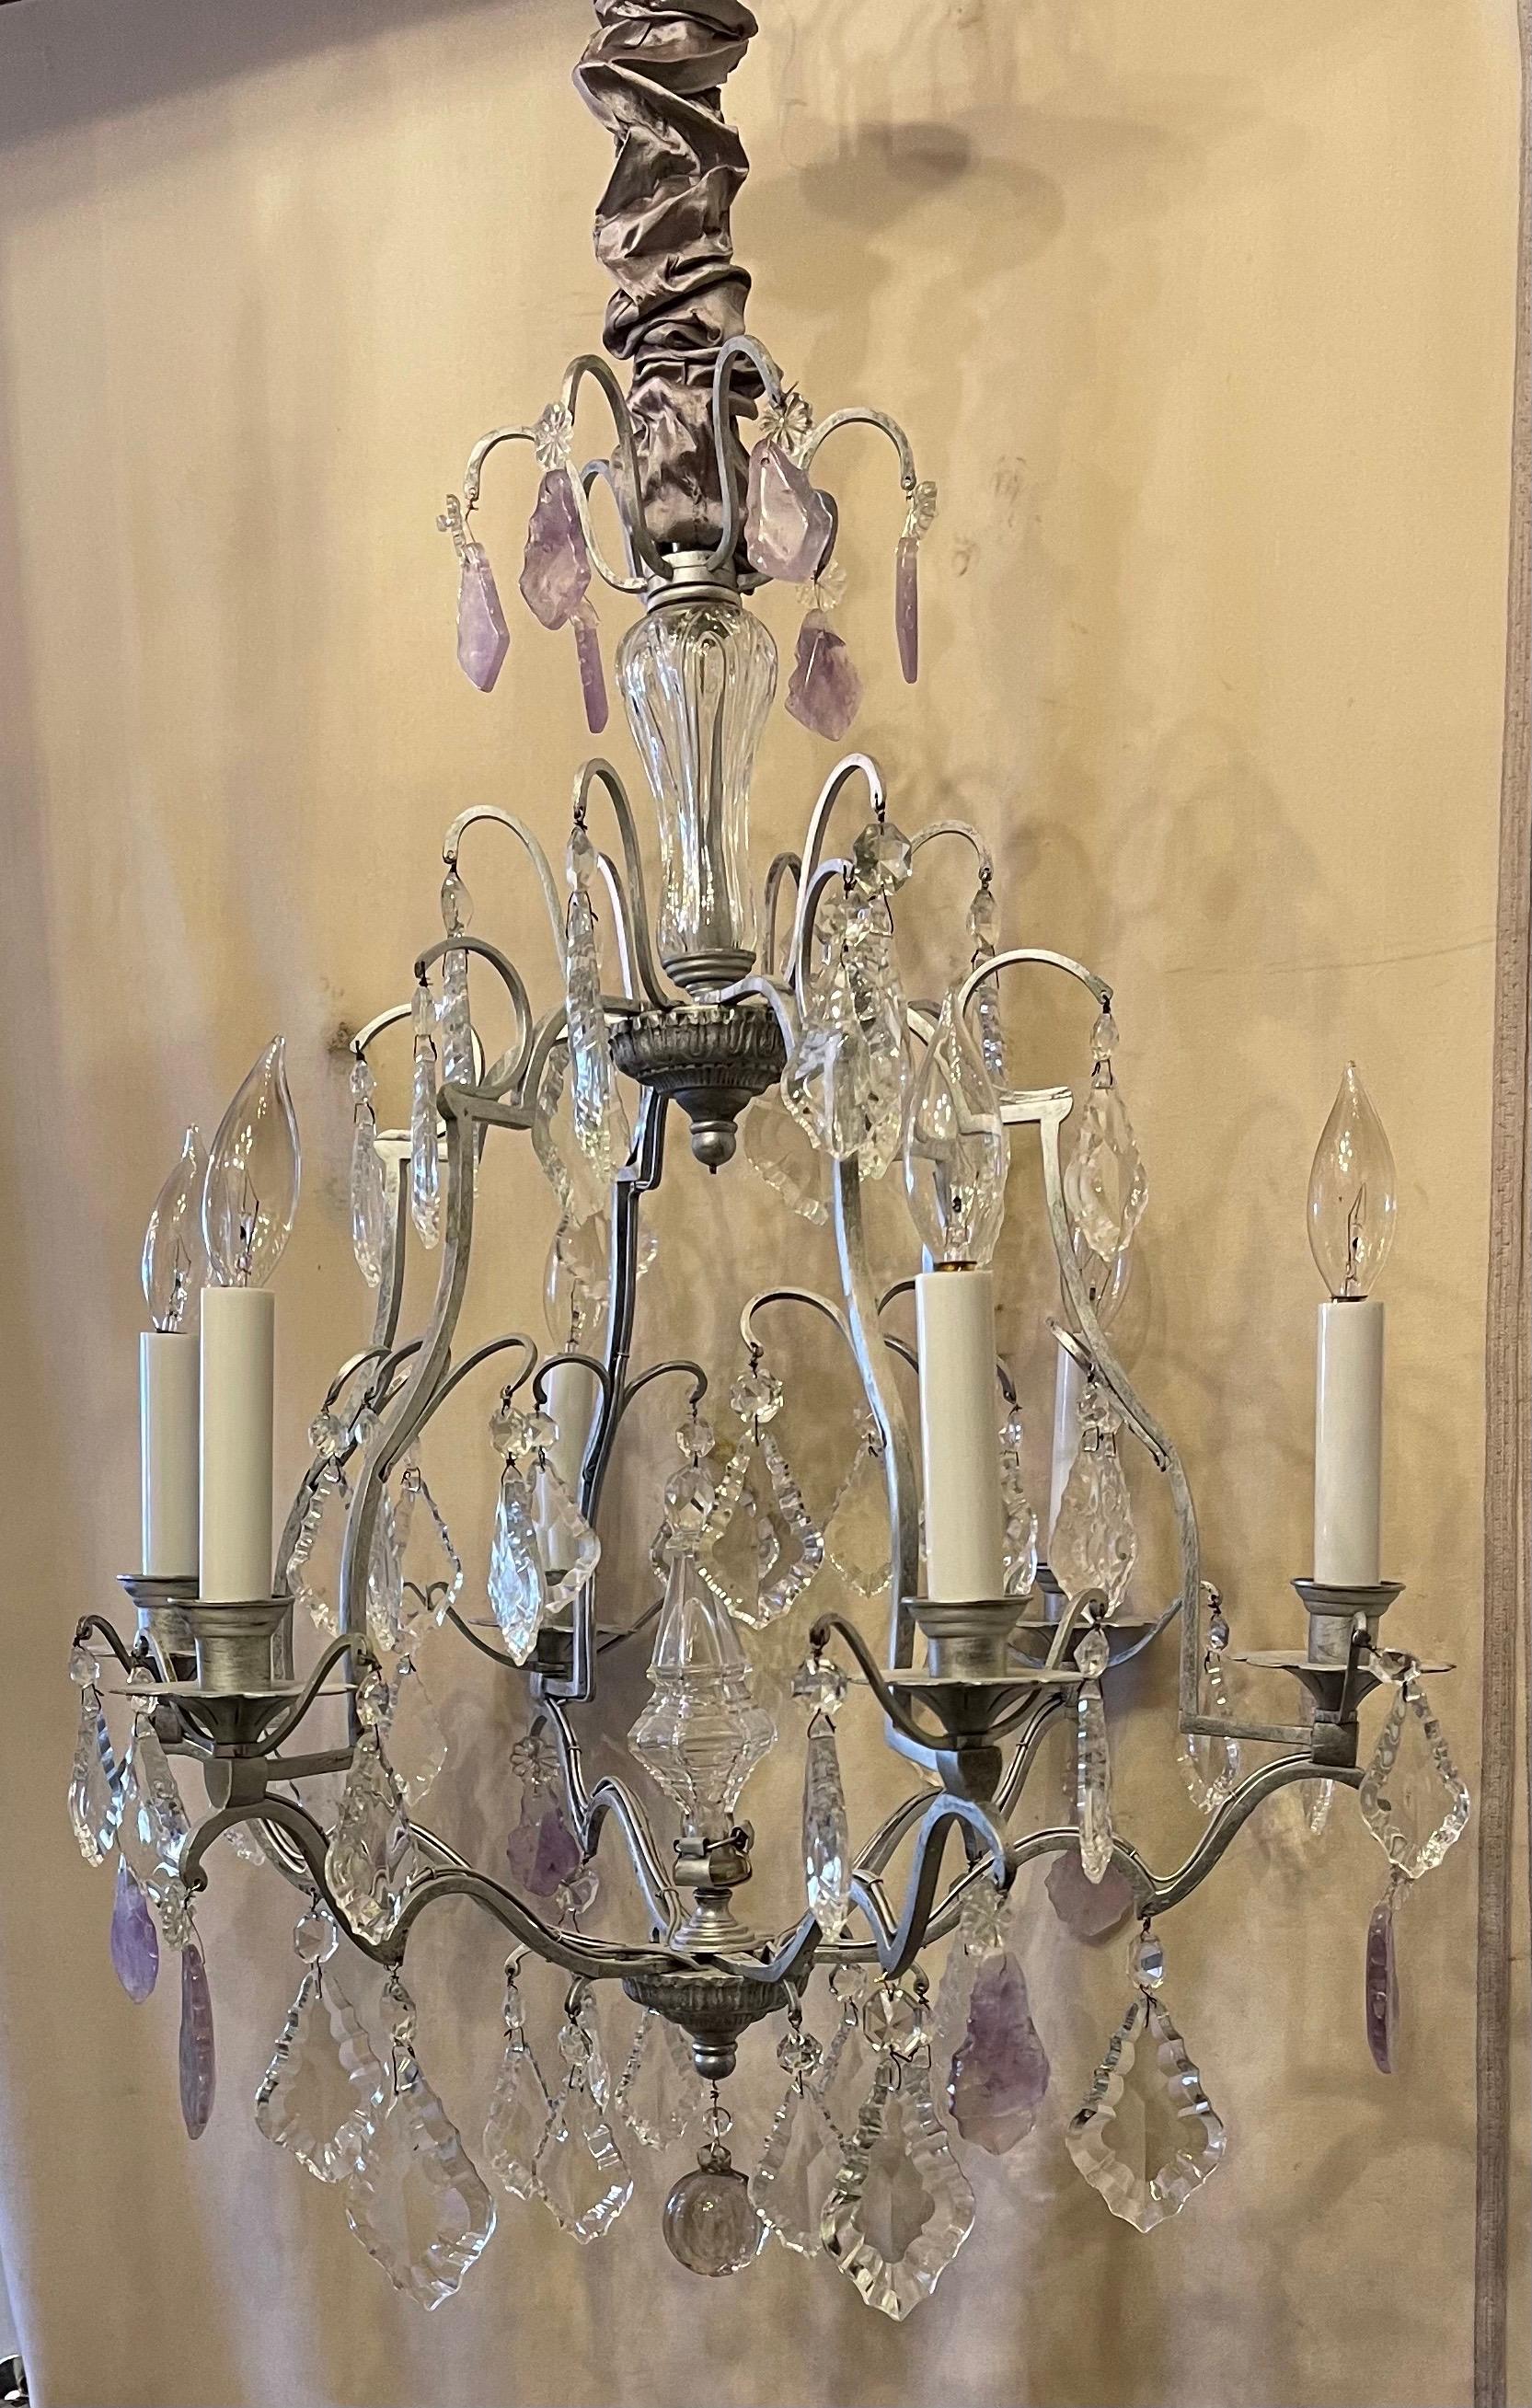 A Wonderful Silver Gilt Baguès French Louis XVI Style Amethyst & Rock Crystal Drop 6 Candelabra Light Bird Cage Chandelier, Rewired And Comes With Chain Canopy And Mounting Hardware.